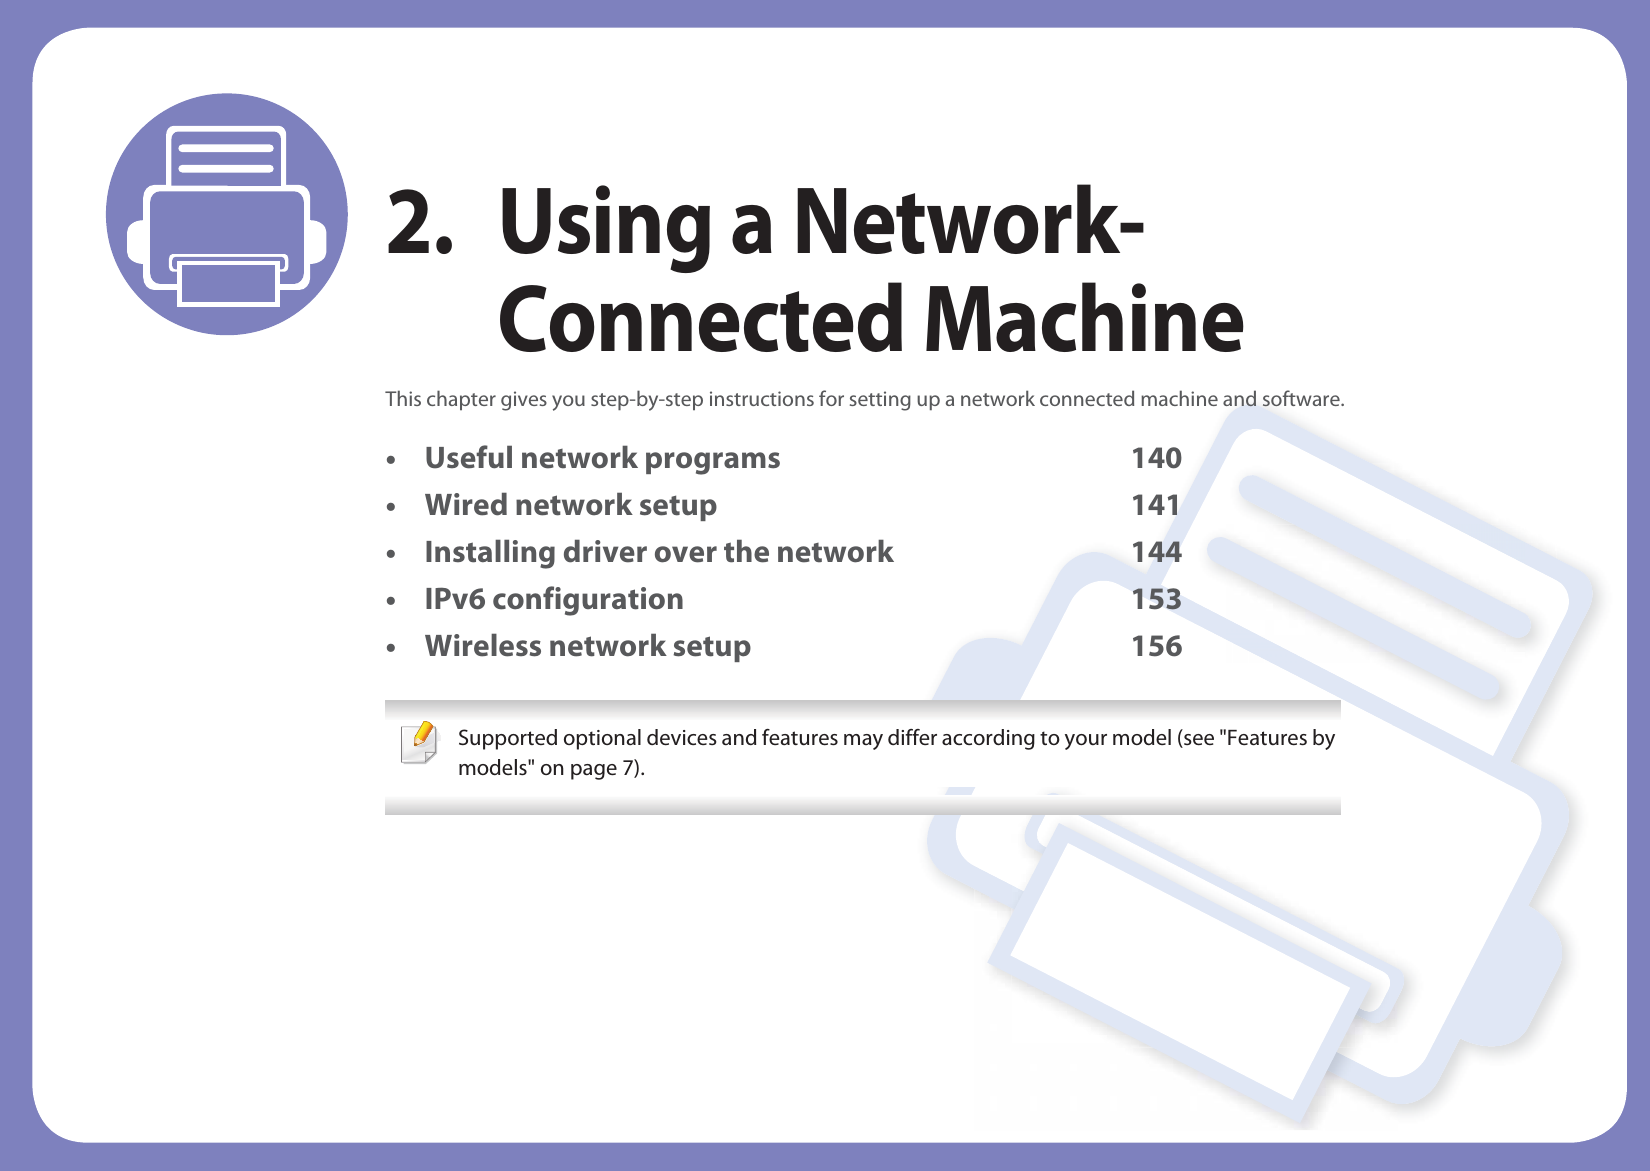 2. Using a Network-Connected MachineThis chapter gives you step-by-step instructions for setting up a network connected machine and software.• Useful network programs 140• Wired network setup 141• Installing driver over the network 144• IPv6 configuration 153• Wireless network setup 156 Supported optional devices and features may differ according to your model (see &quot;Features by models&quot; on page 7). 